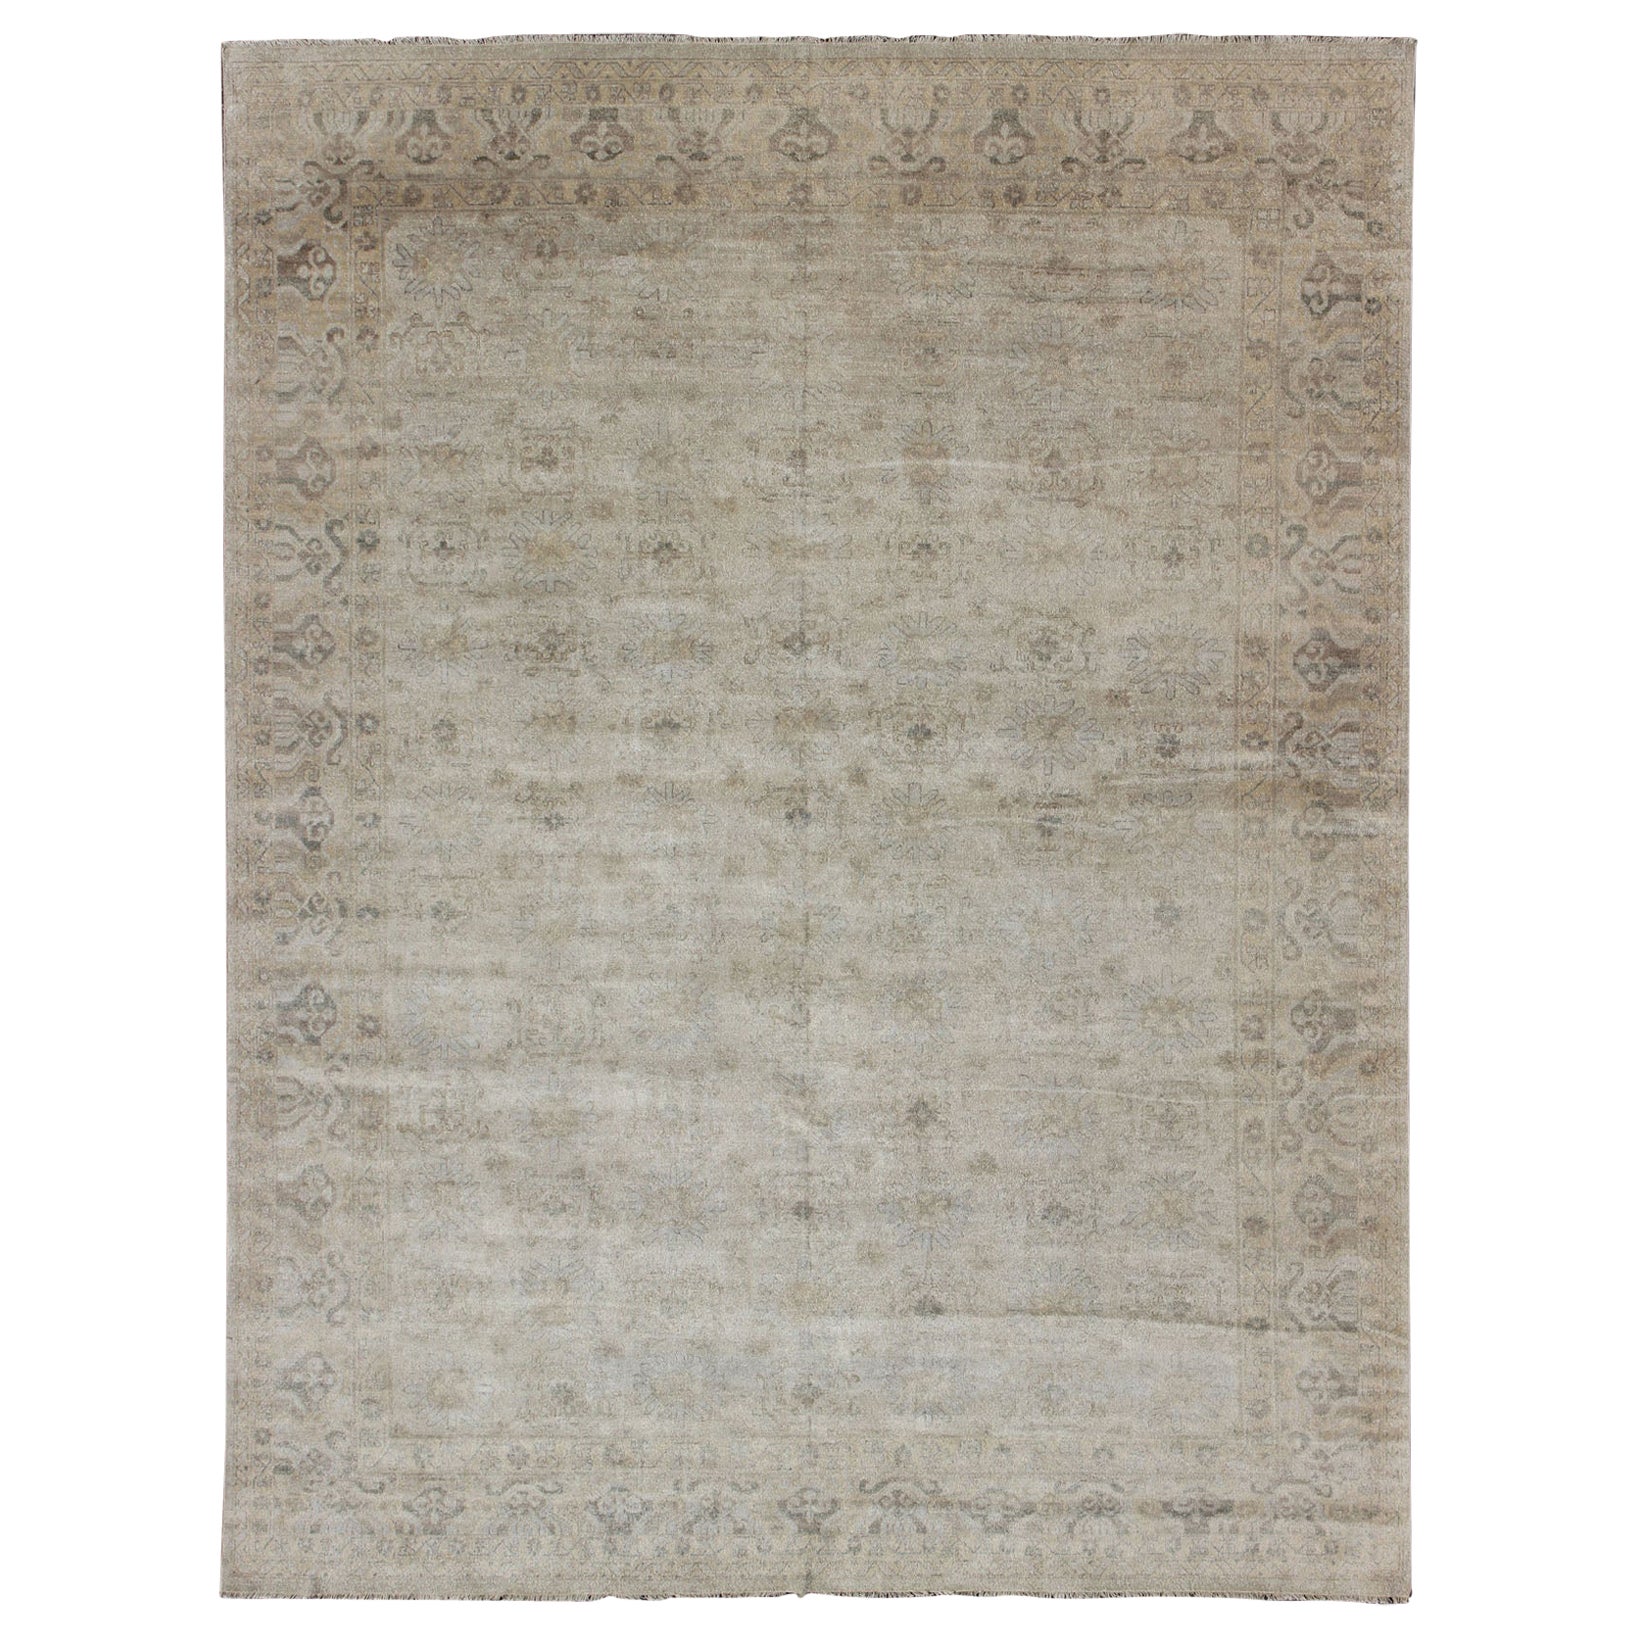 Large Muted Modern Khotan Rug with All-Over Sub-Geometric Motifs